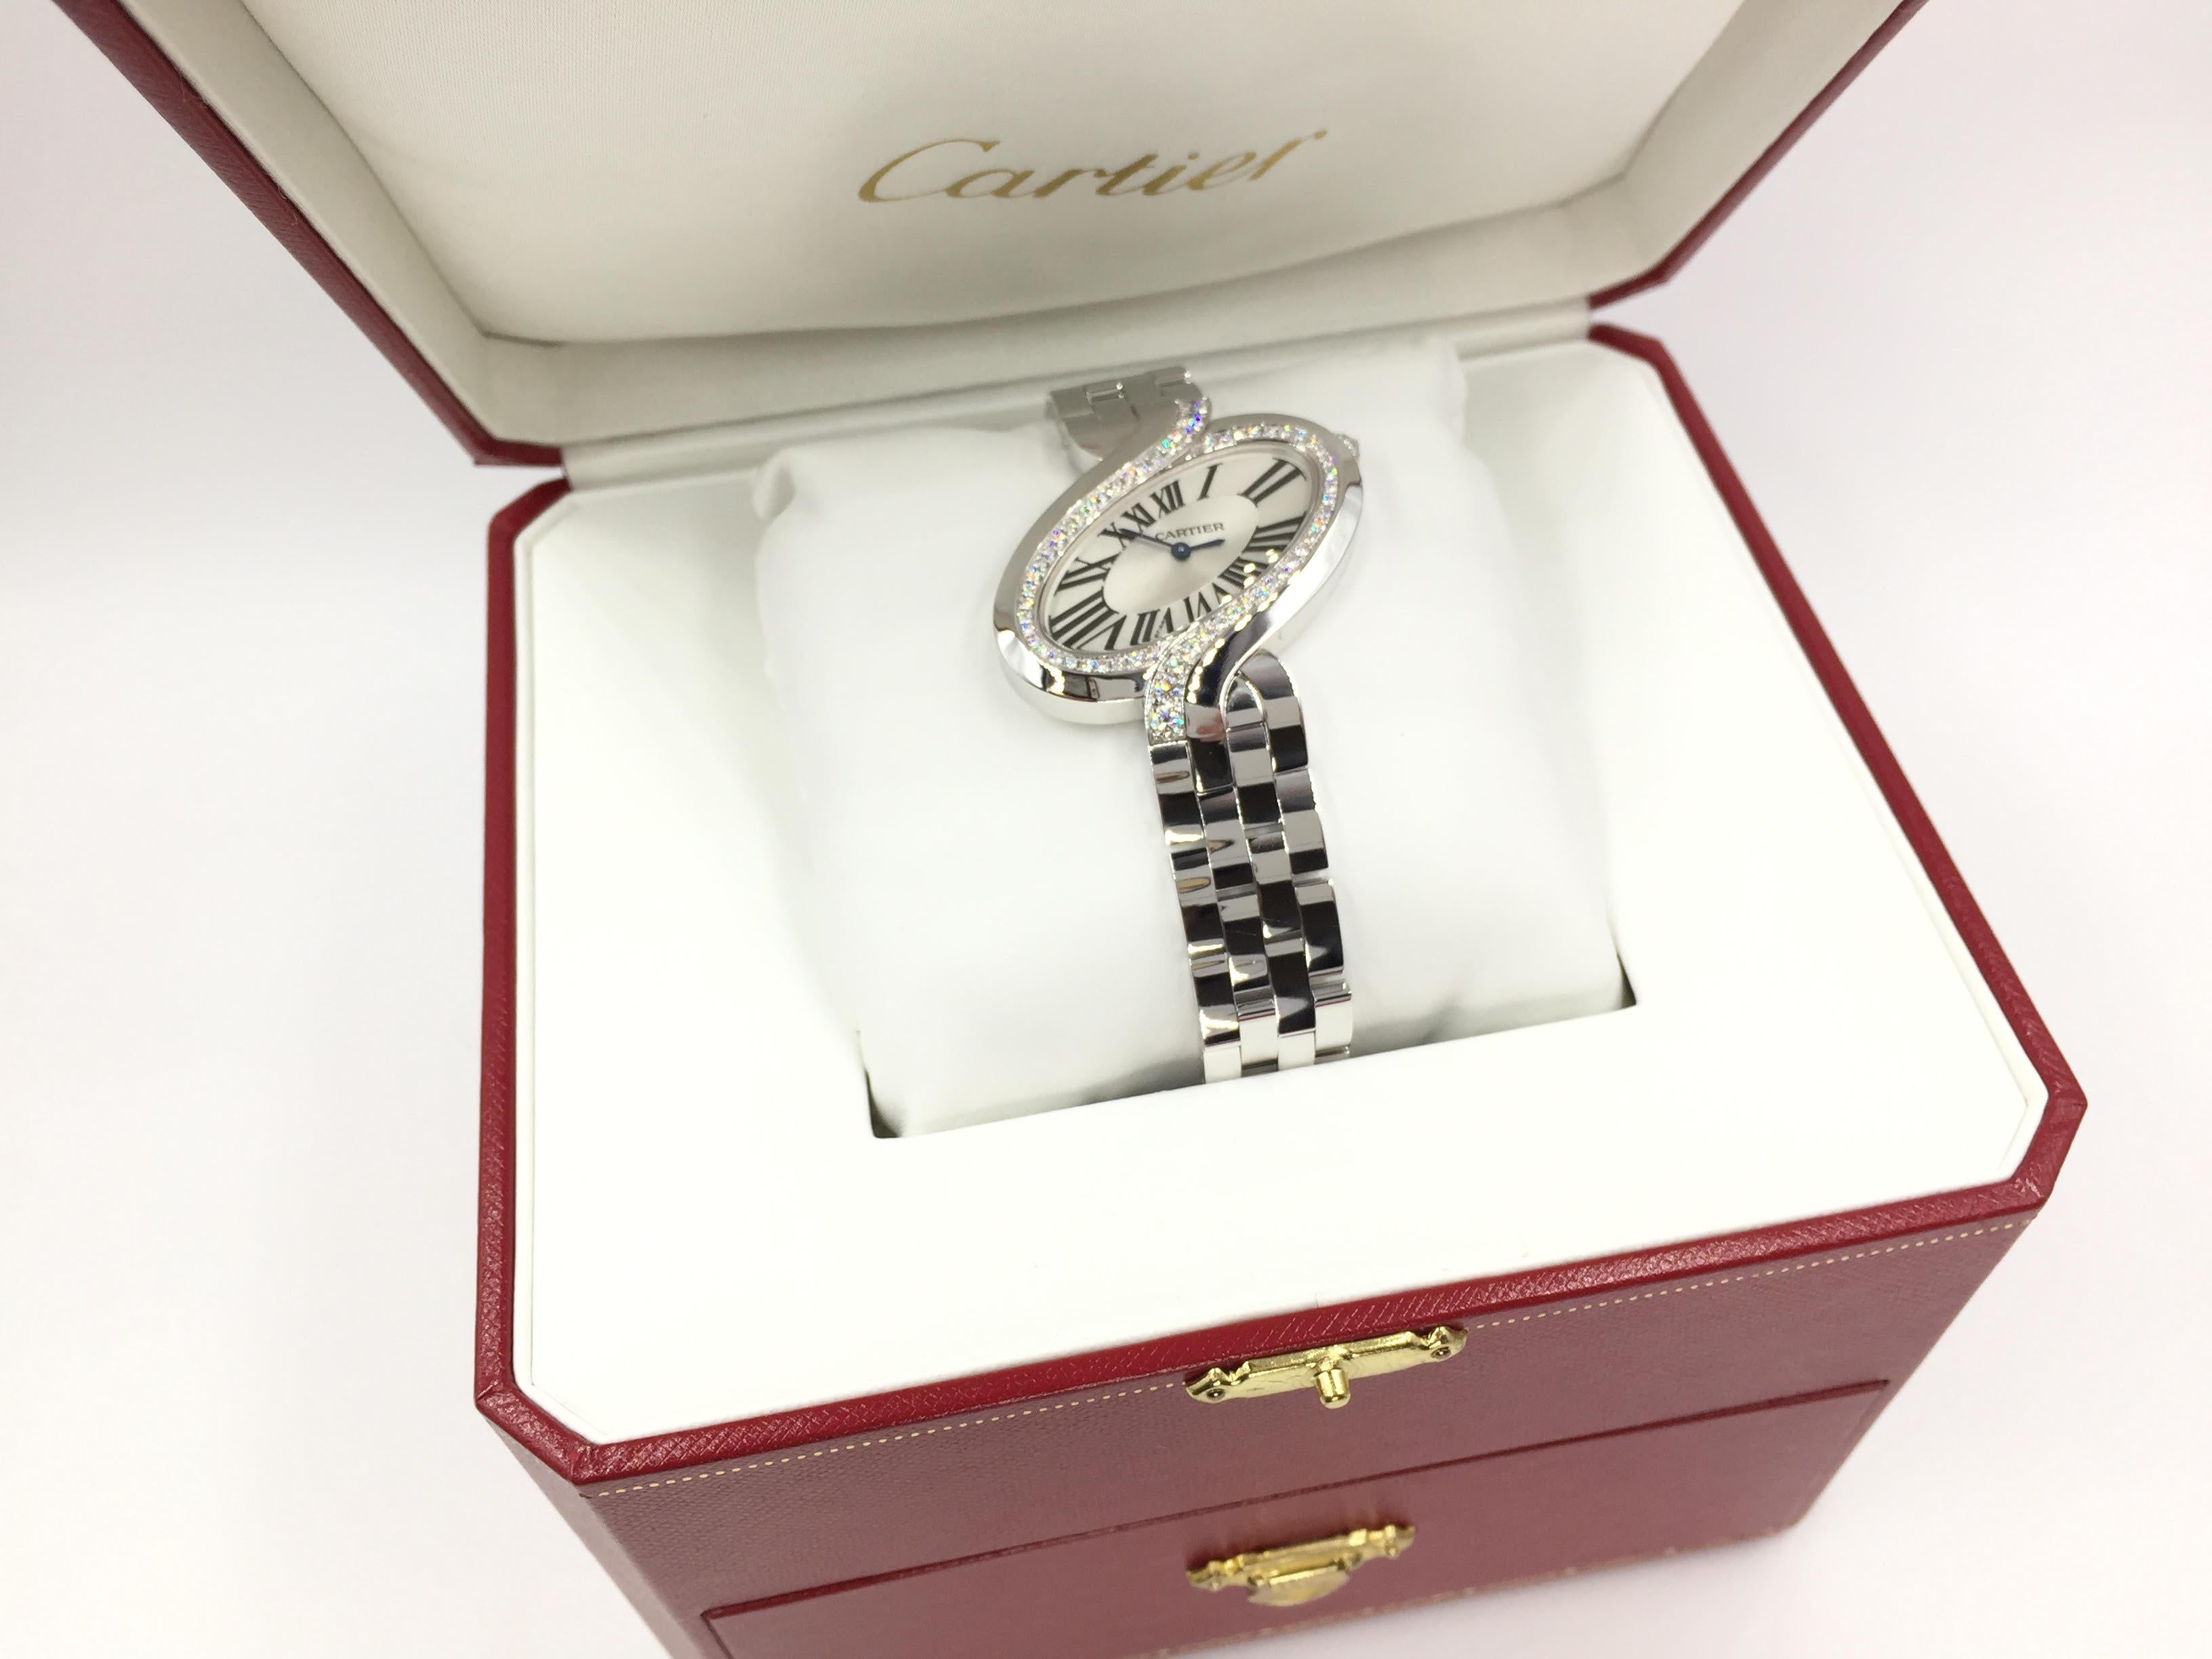 Cartier Delices Large Watch 18 Karat White Gold WG800007 For Sale 2